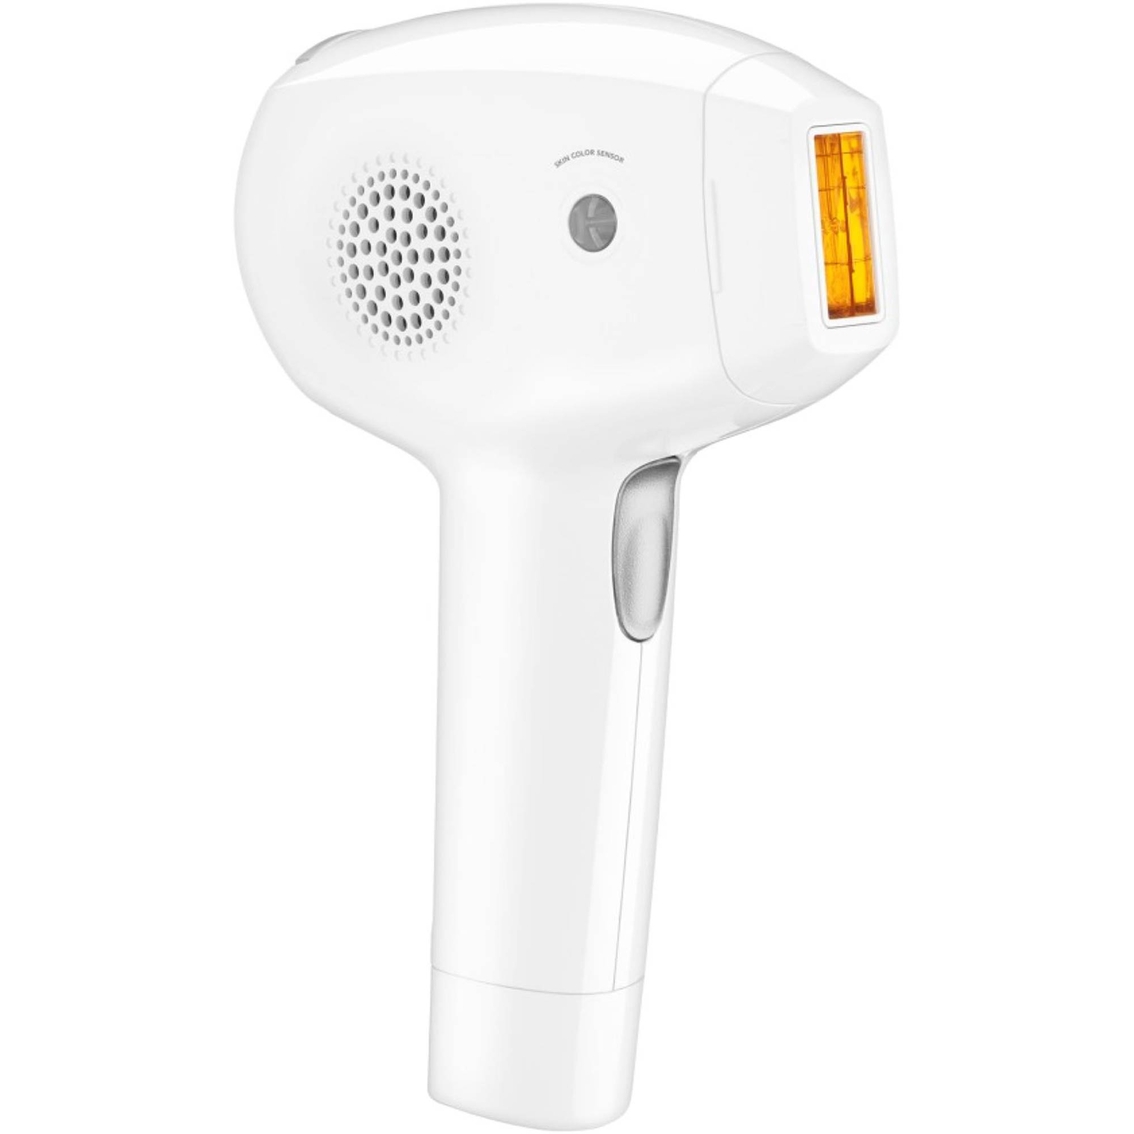 Conair Lumilisse Intense Pulsed Light Hair Removal Device - Image 4 of 10